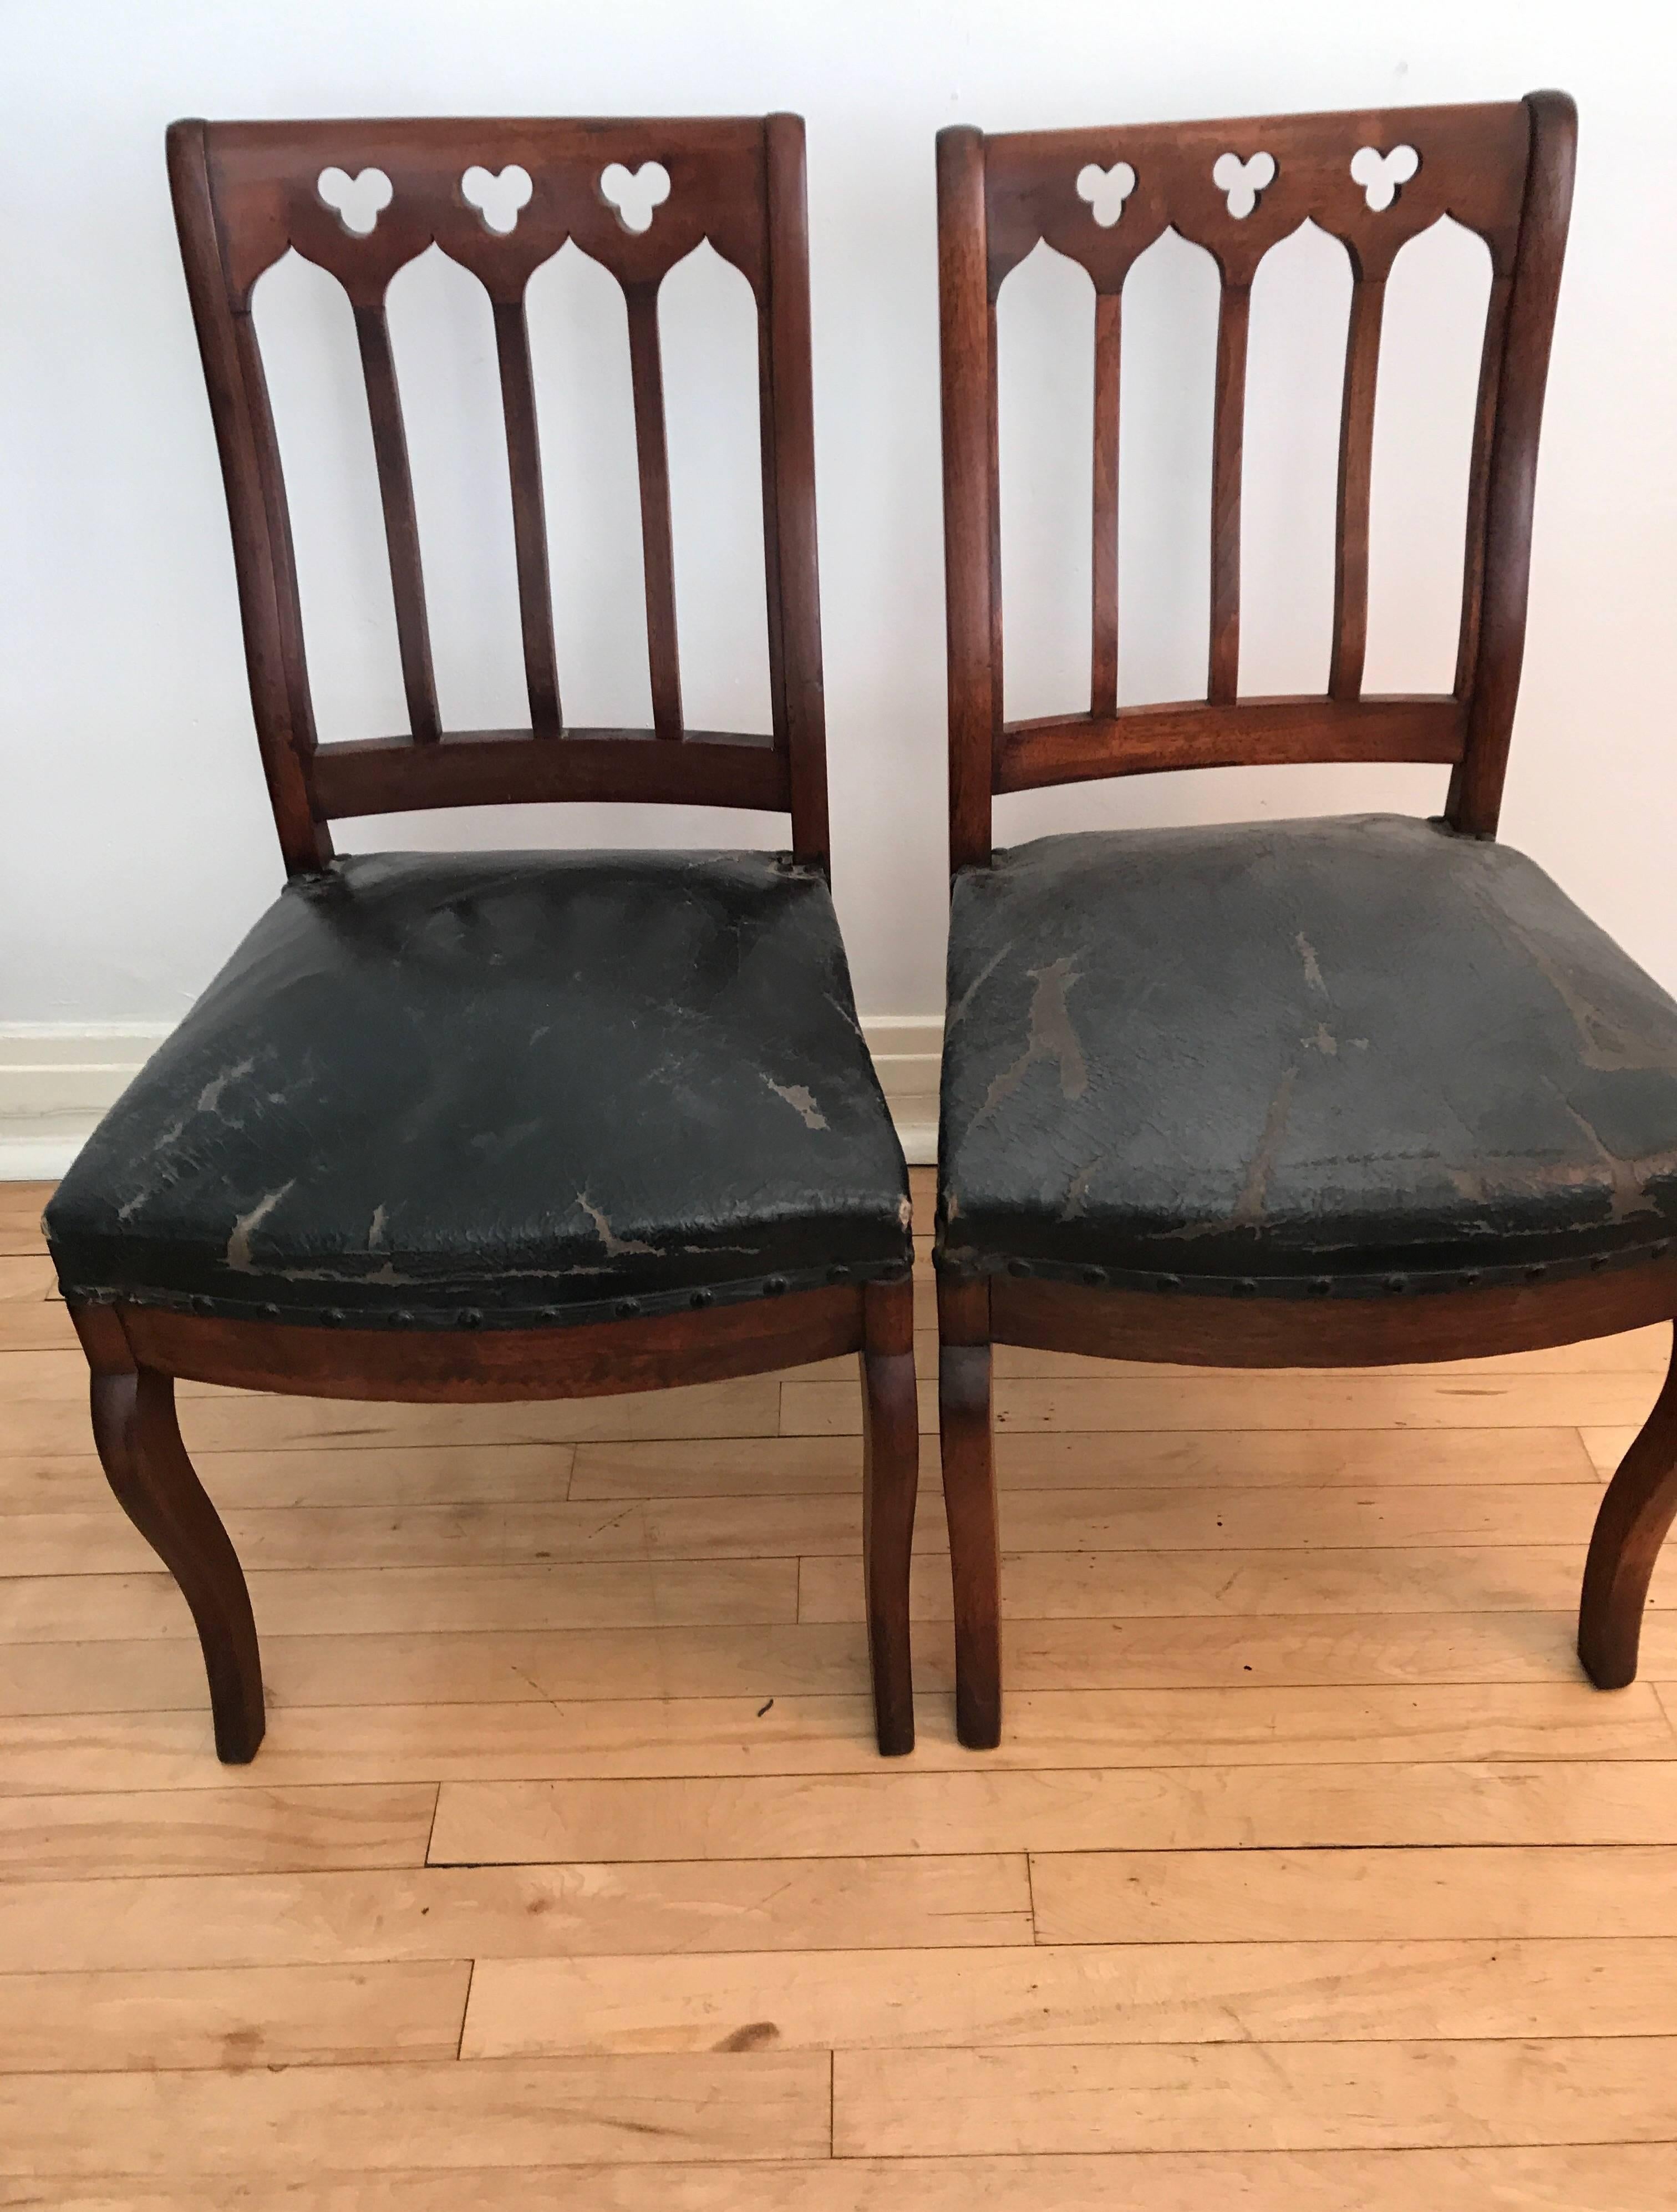 A pair of American 19th century Gothic Revival walnut hall chairs. The side chairs are still upholstered in their original leather.